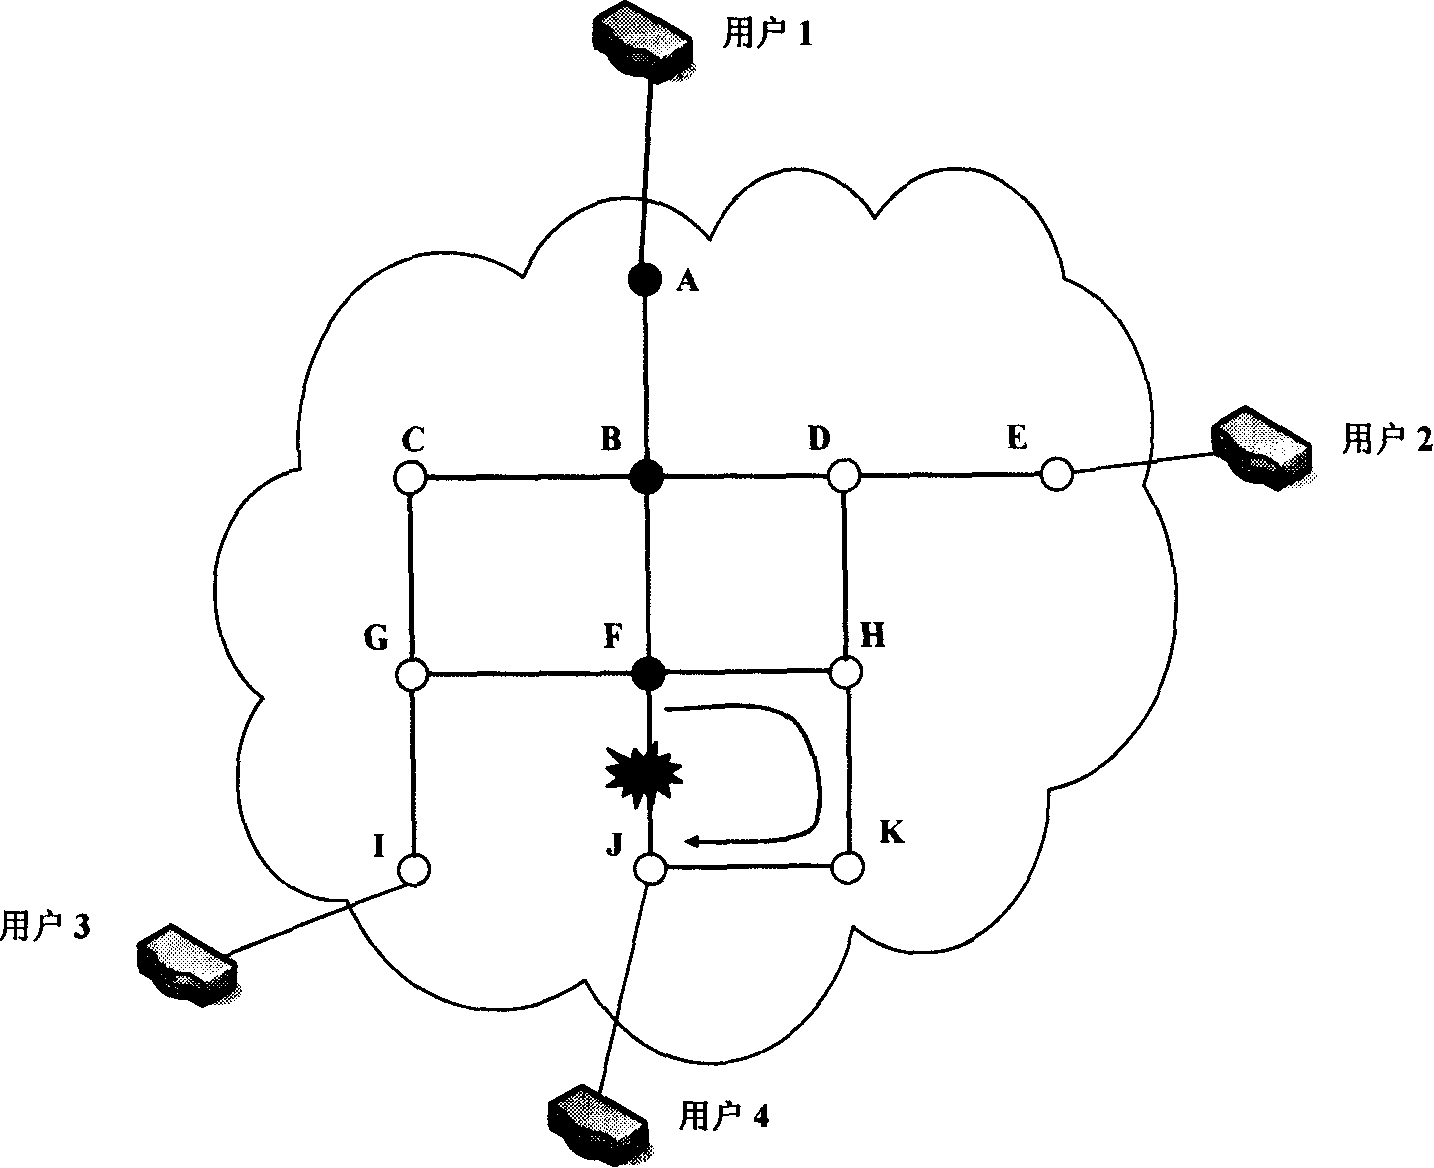 A recovery method for multicast service connection in automatic switching optical network